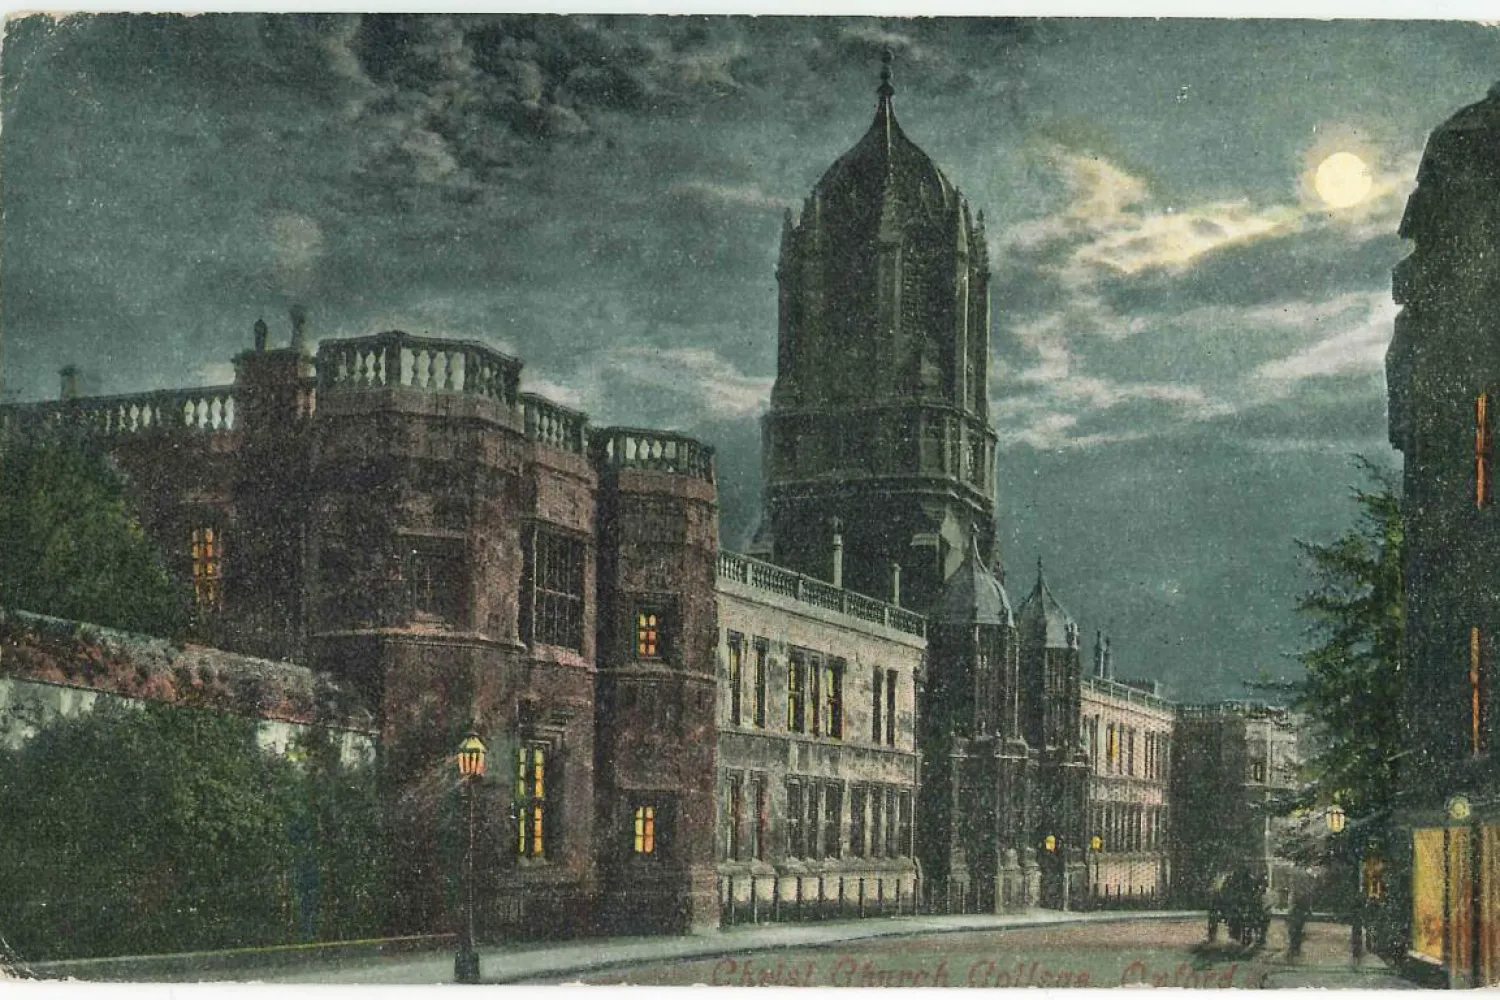 A postcard of a painting depicting the front of Christ Church